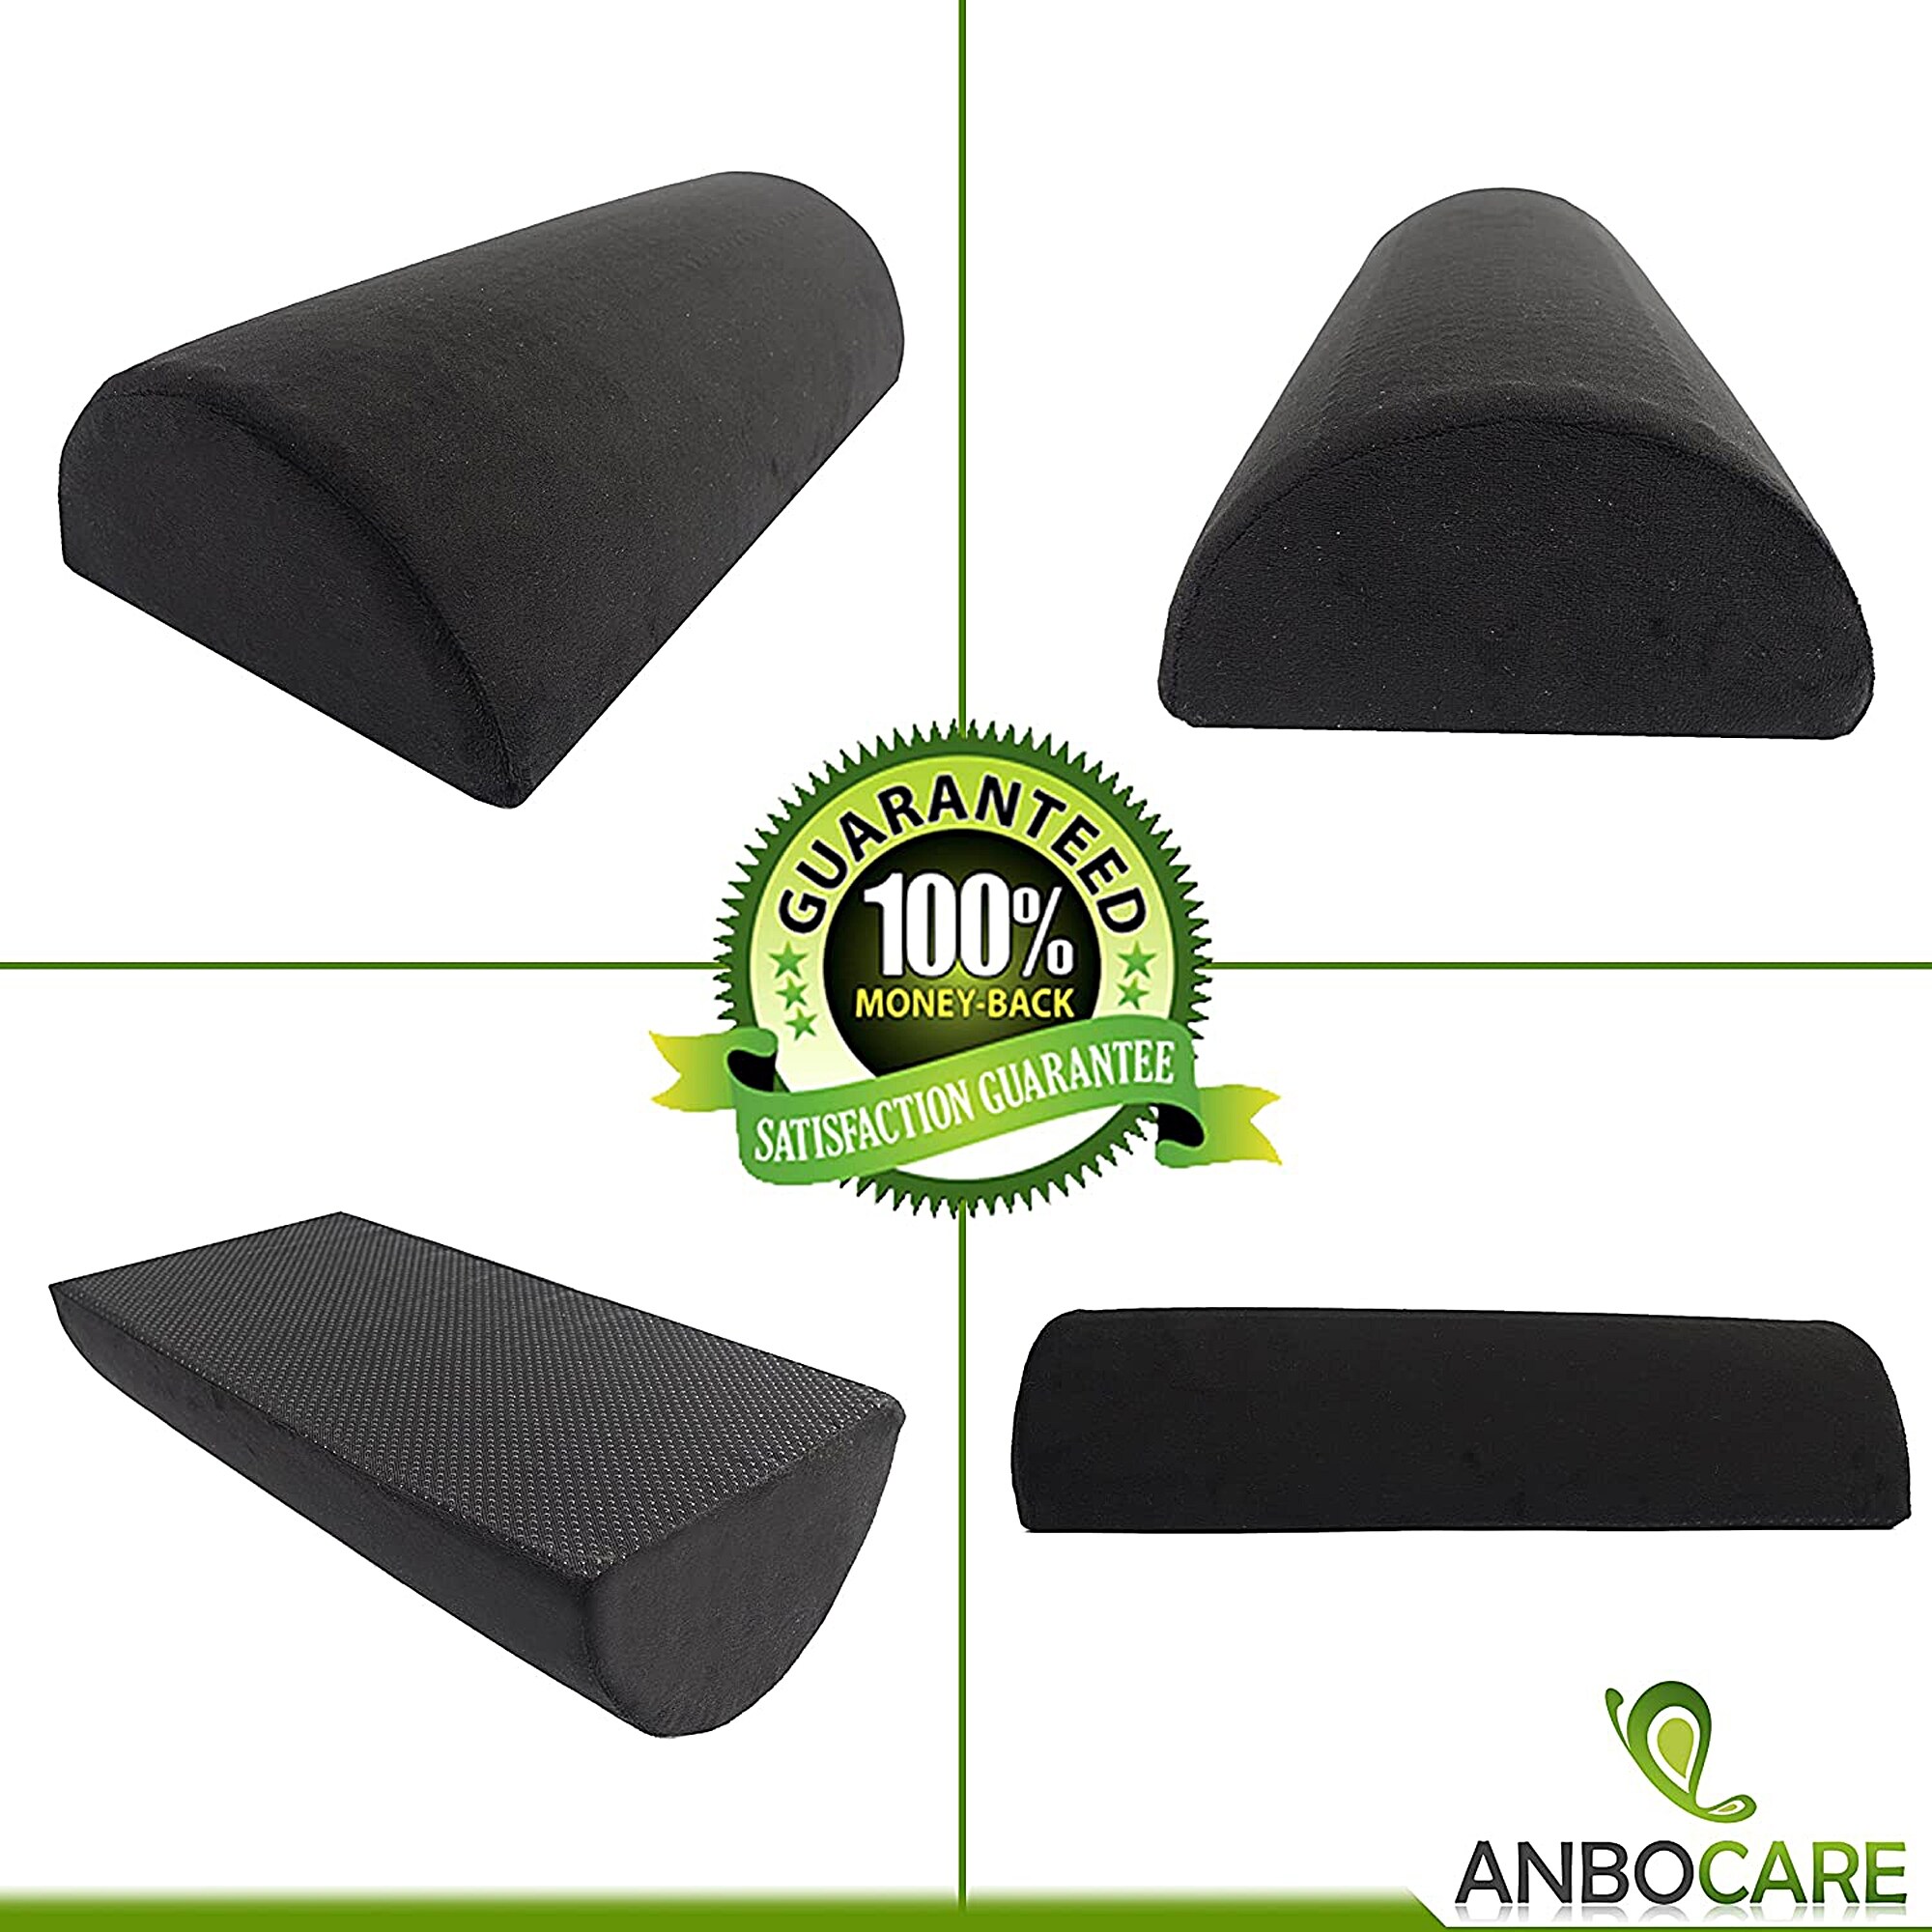 https://ak1.ostkcdn.com/images/products/is/images/direct/1ab01f5061b05b357aa04be266c1e0bb9577ce42/Dr-Pillow-Half-Moon-Lumbar-Cushion-2-PACK-Pillow-Black.jpg